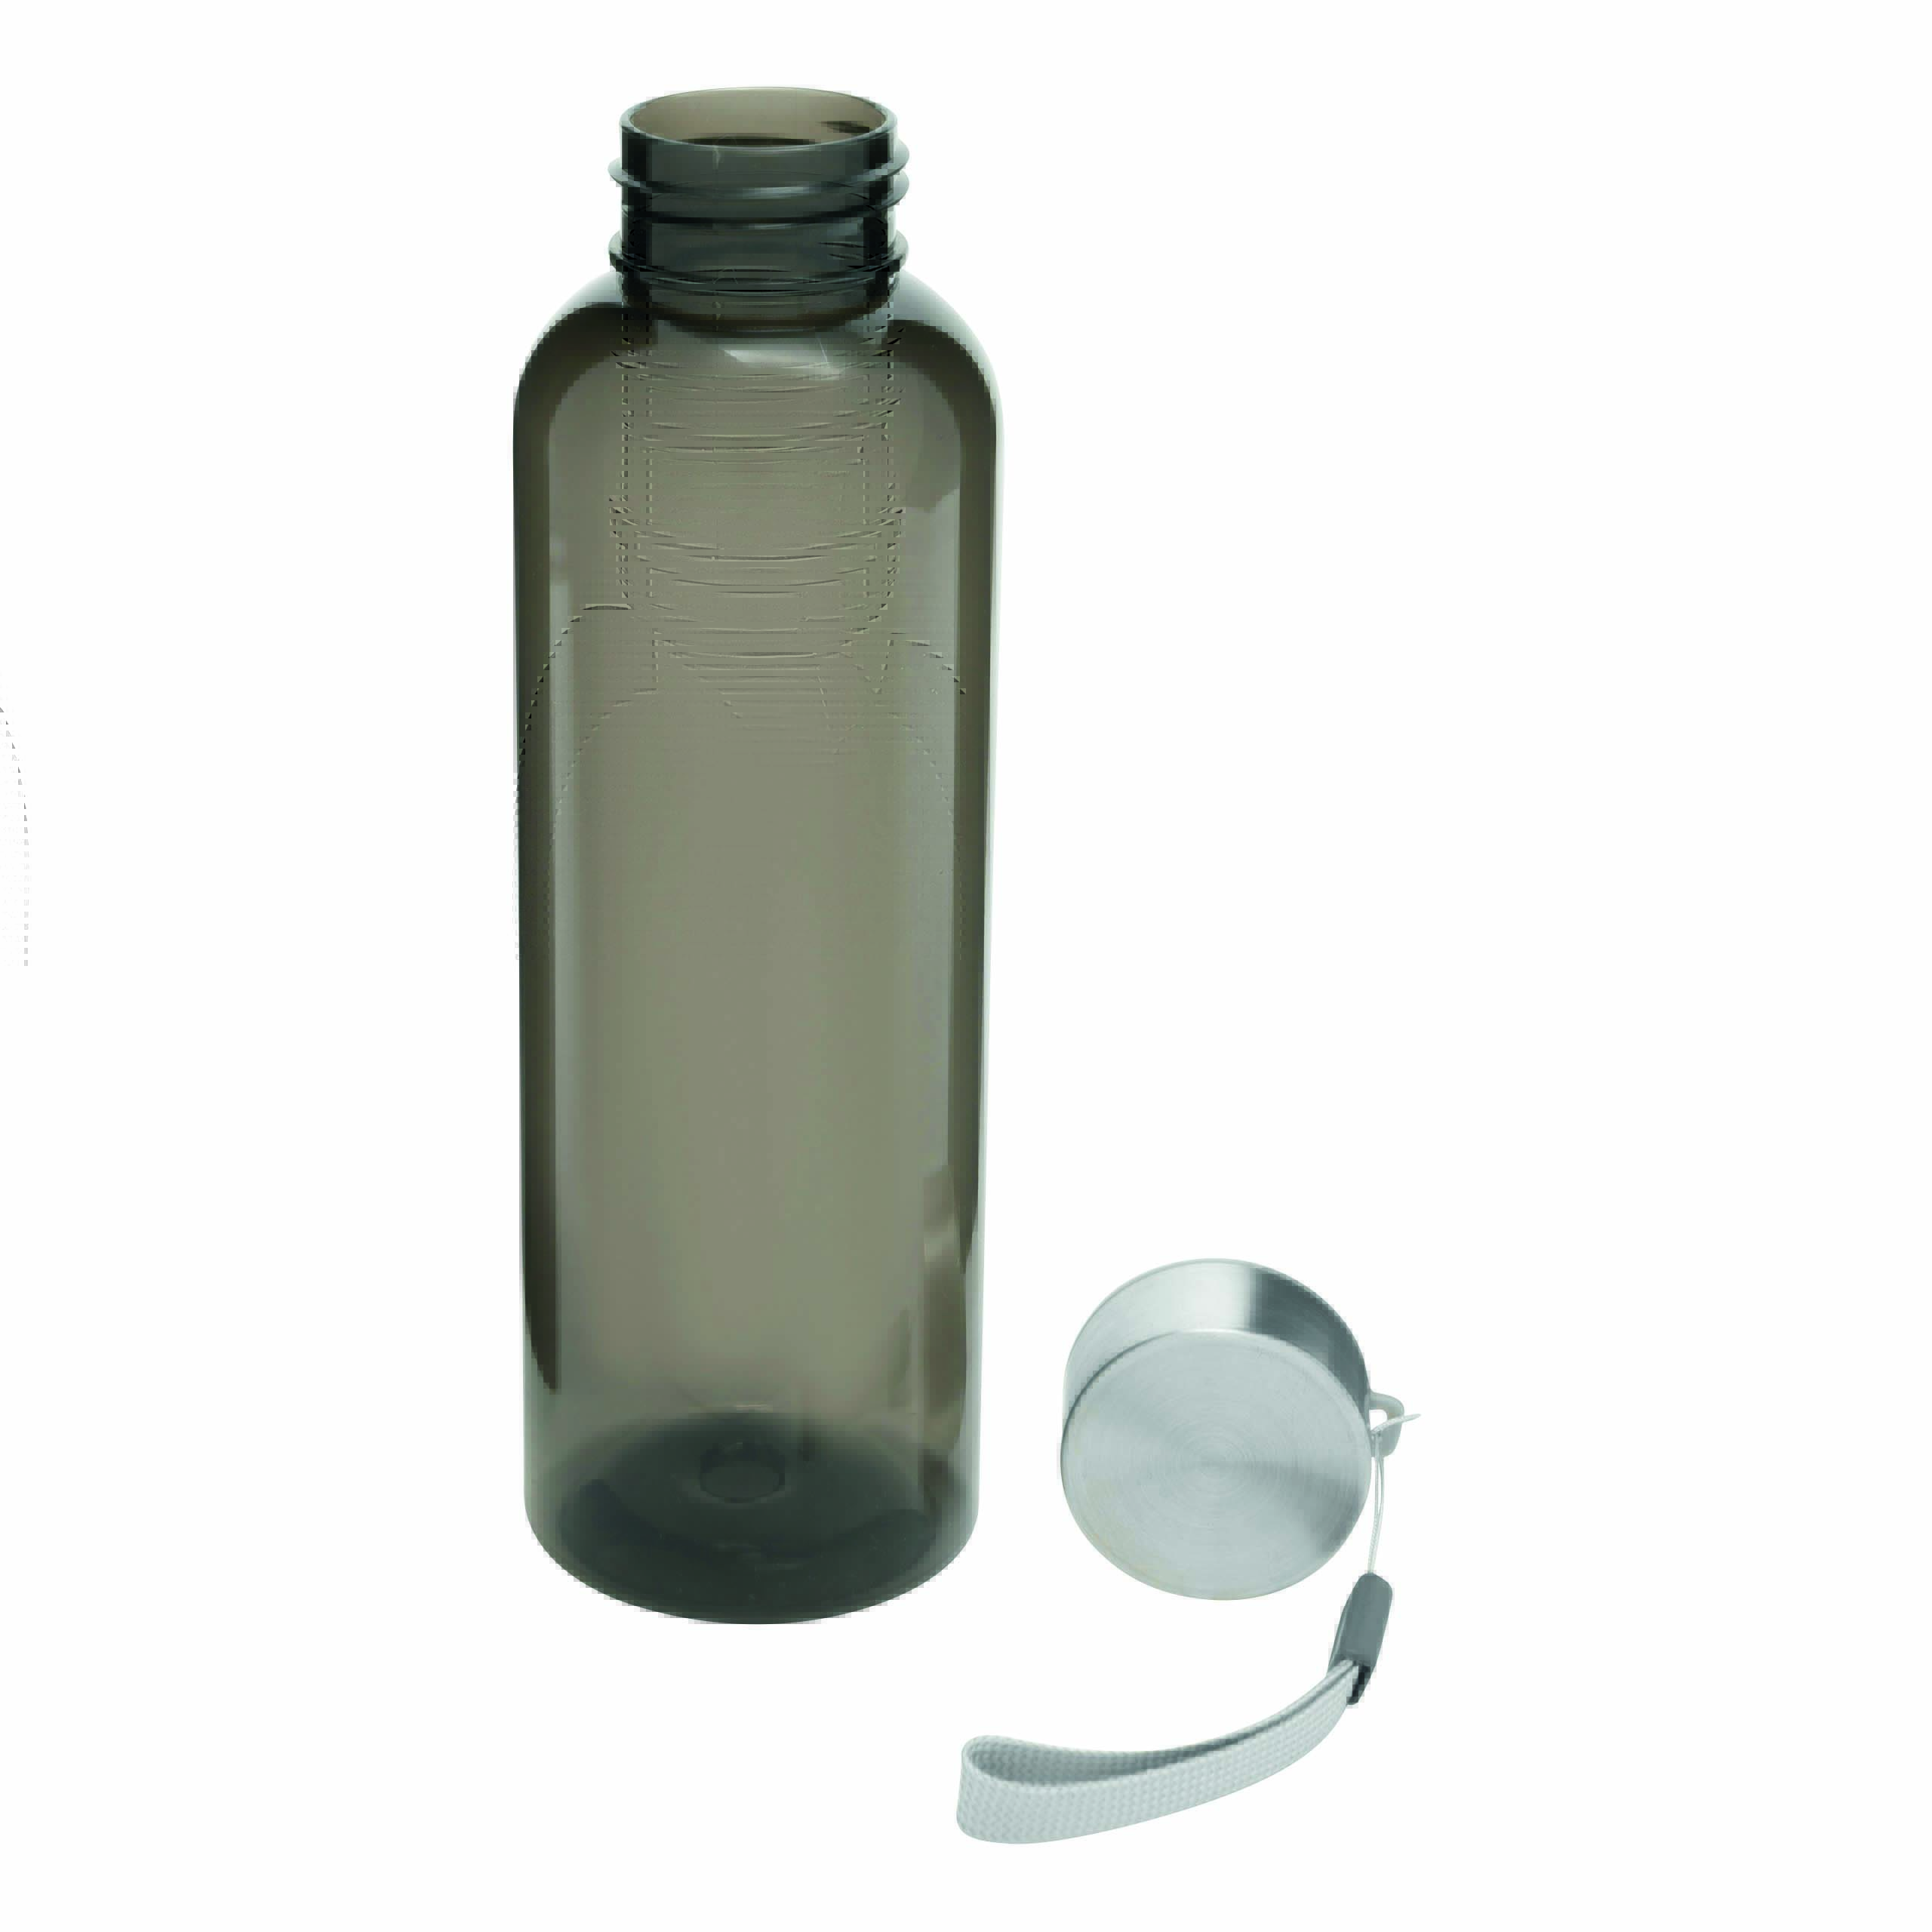 Trinkflasche PLAINLY 56-0304242